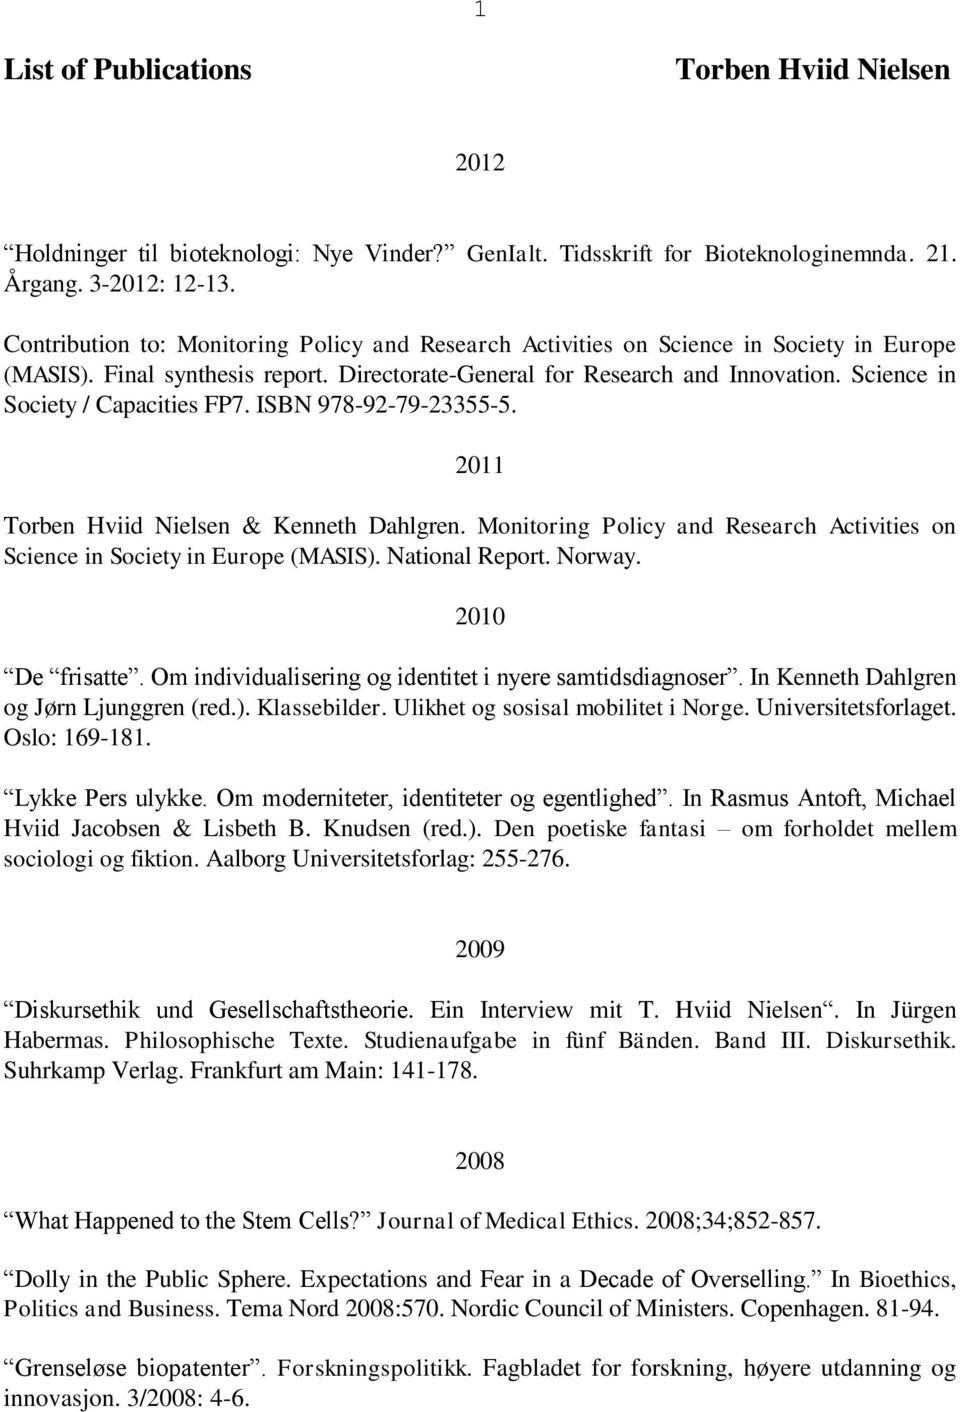 Science in Society / Capacities FP7. ISBN 978-92-79-23355-5. 2011 Torben Hviid Nielsen & Kenneth Dahlgren. Monitoring Policy and Research Activities on Science in Society in Europe (MASIS).